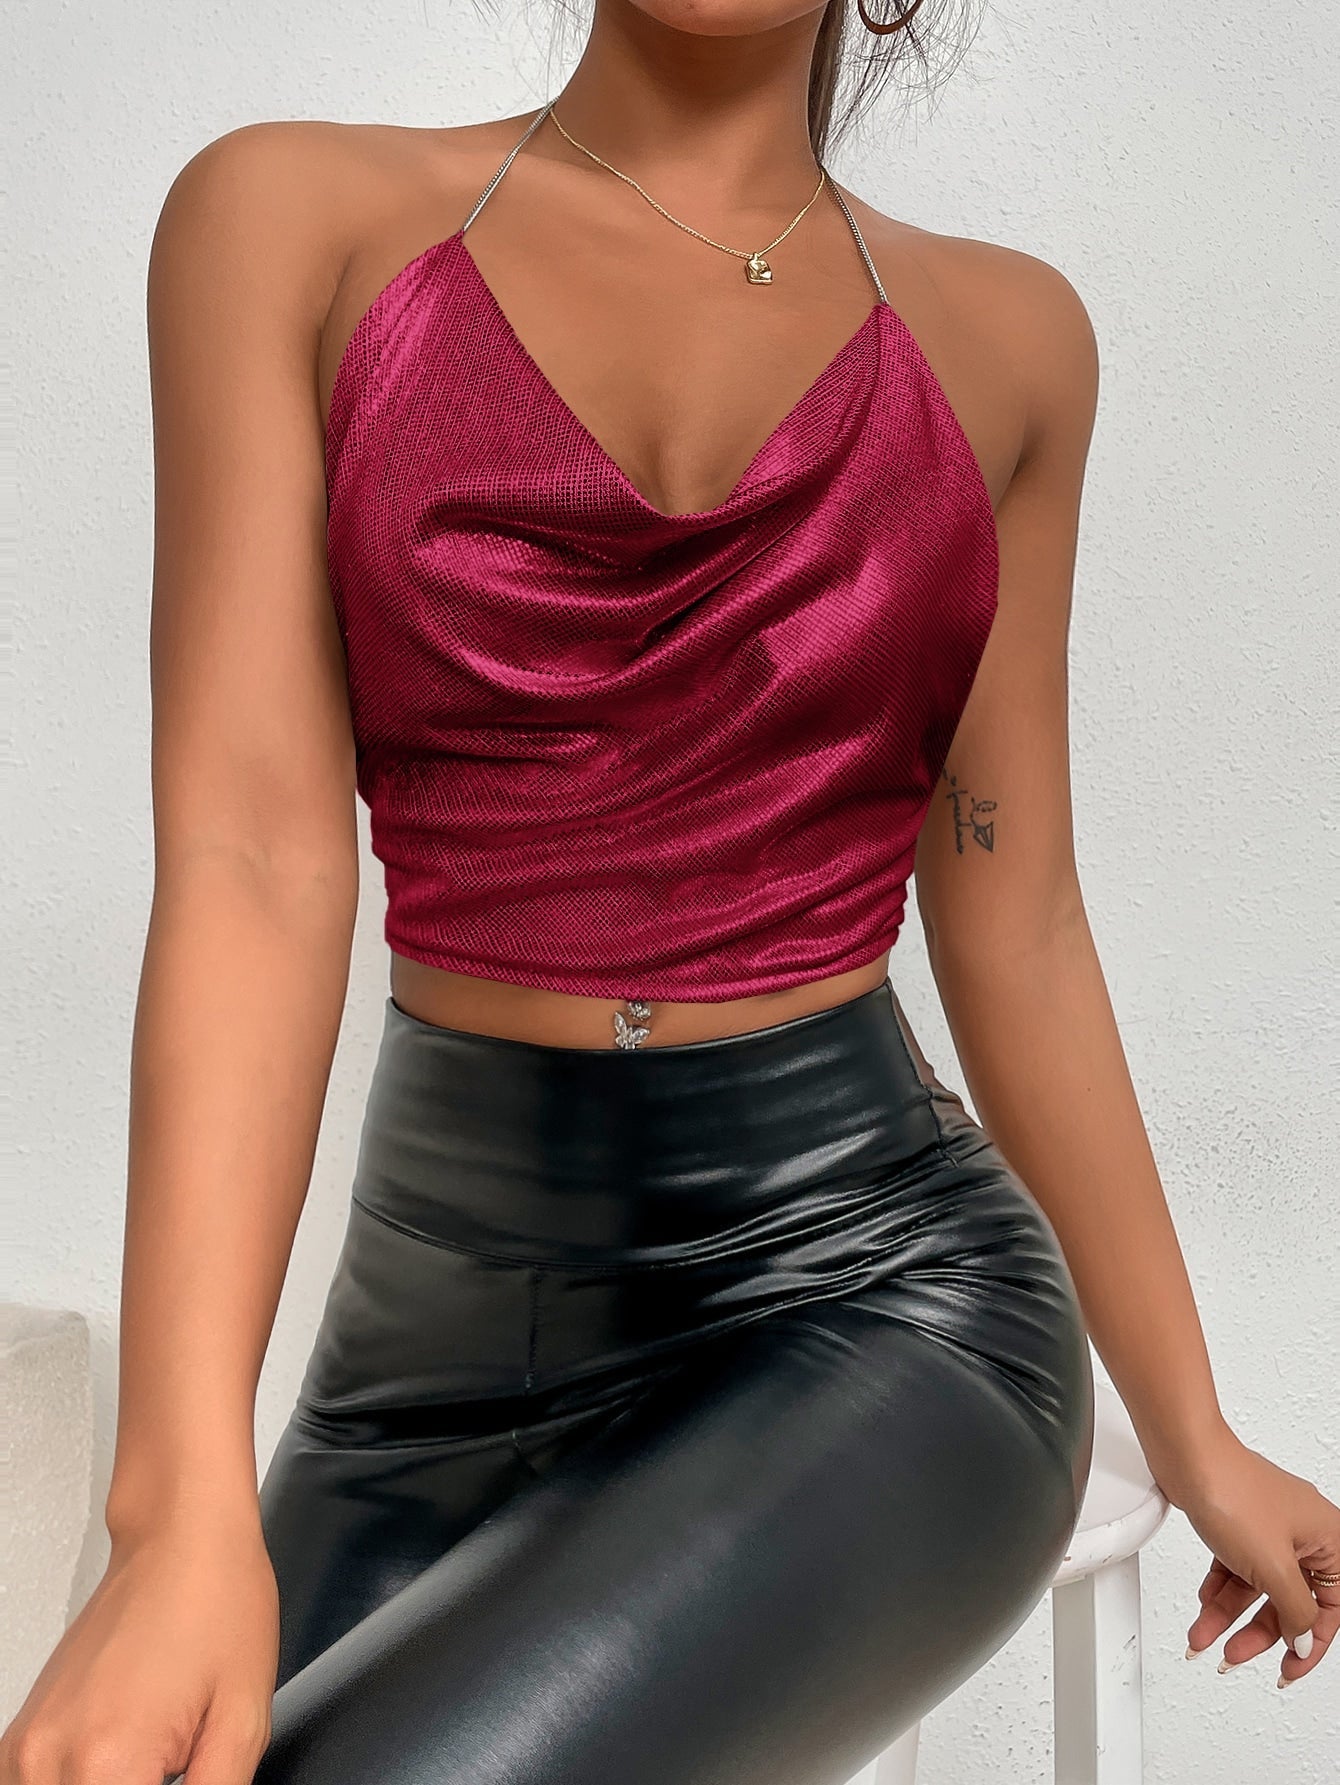 Draped Collar Chain Detail Tie Backless Glitter Halter Top - Negative Apparel